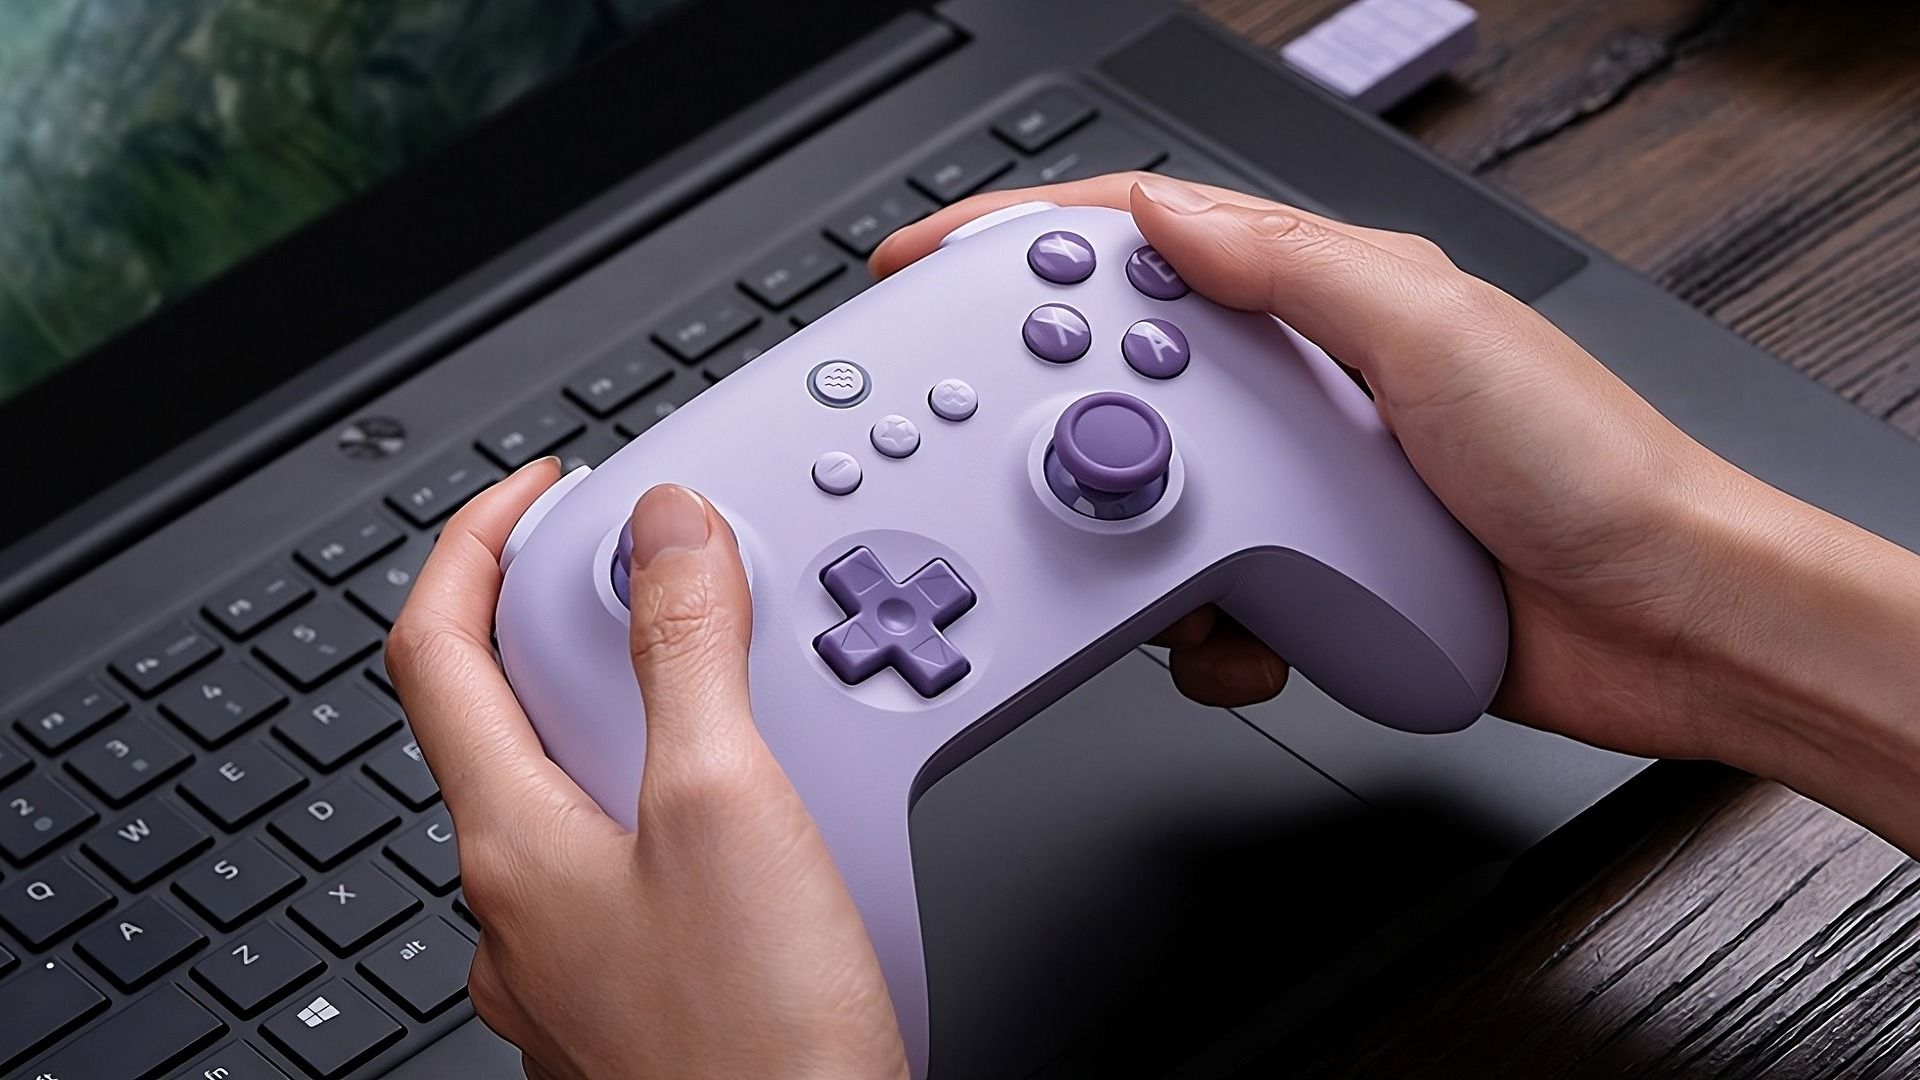 8Bitdo's New $30 Gaming Controller Works With PC & Android